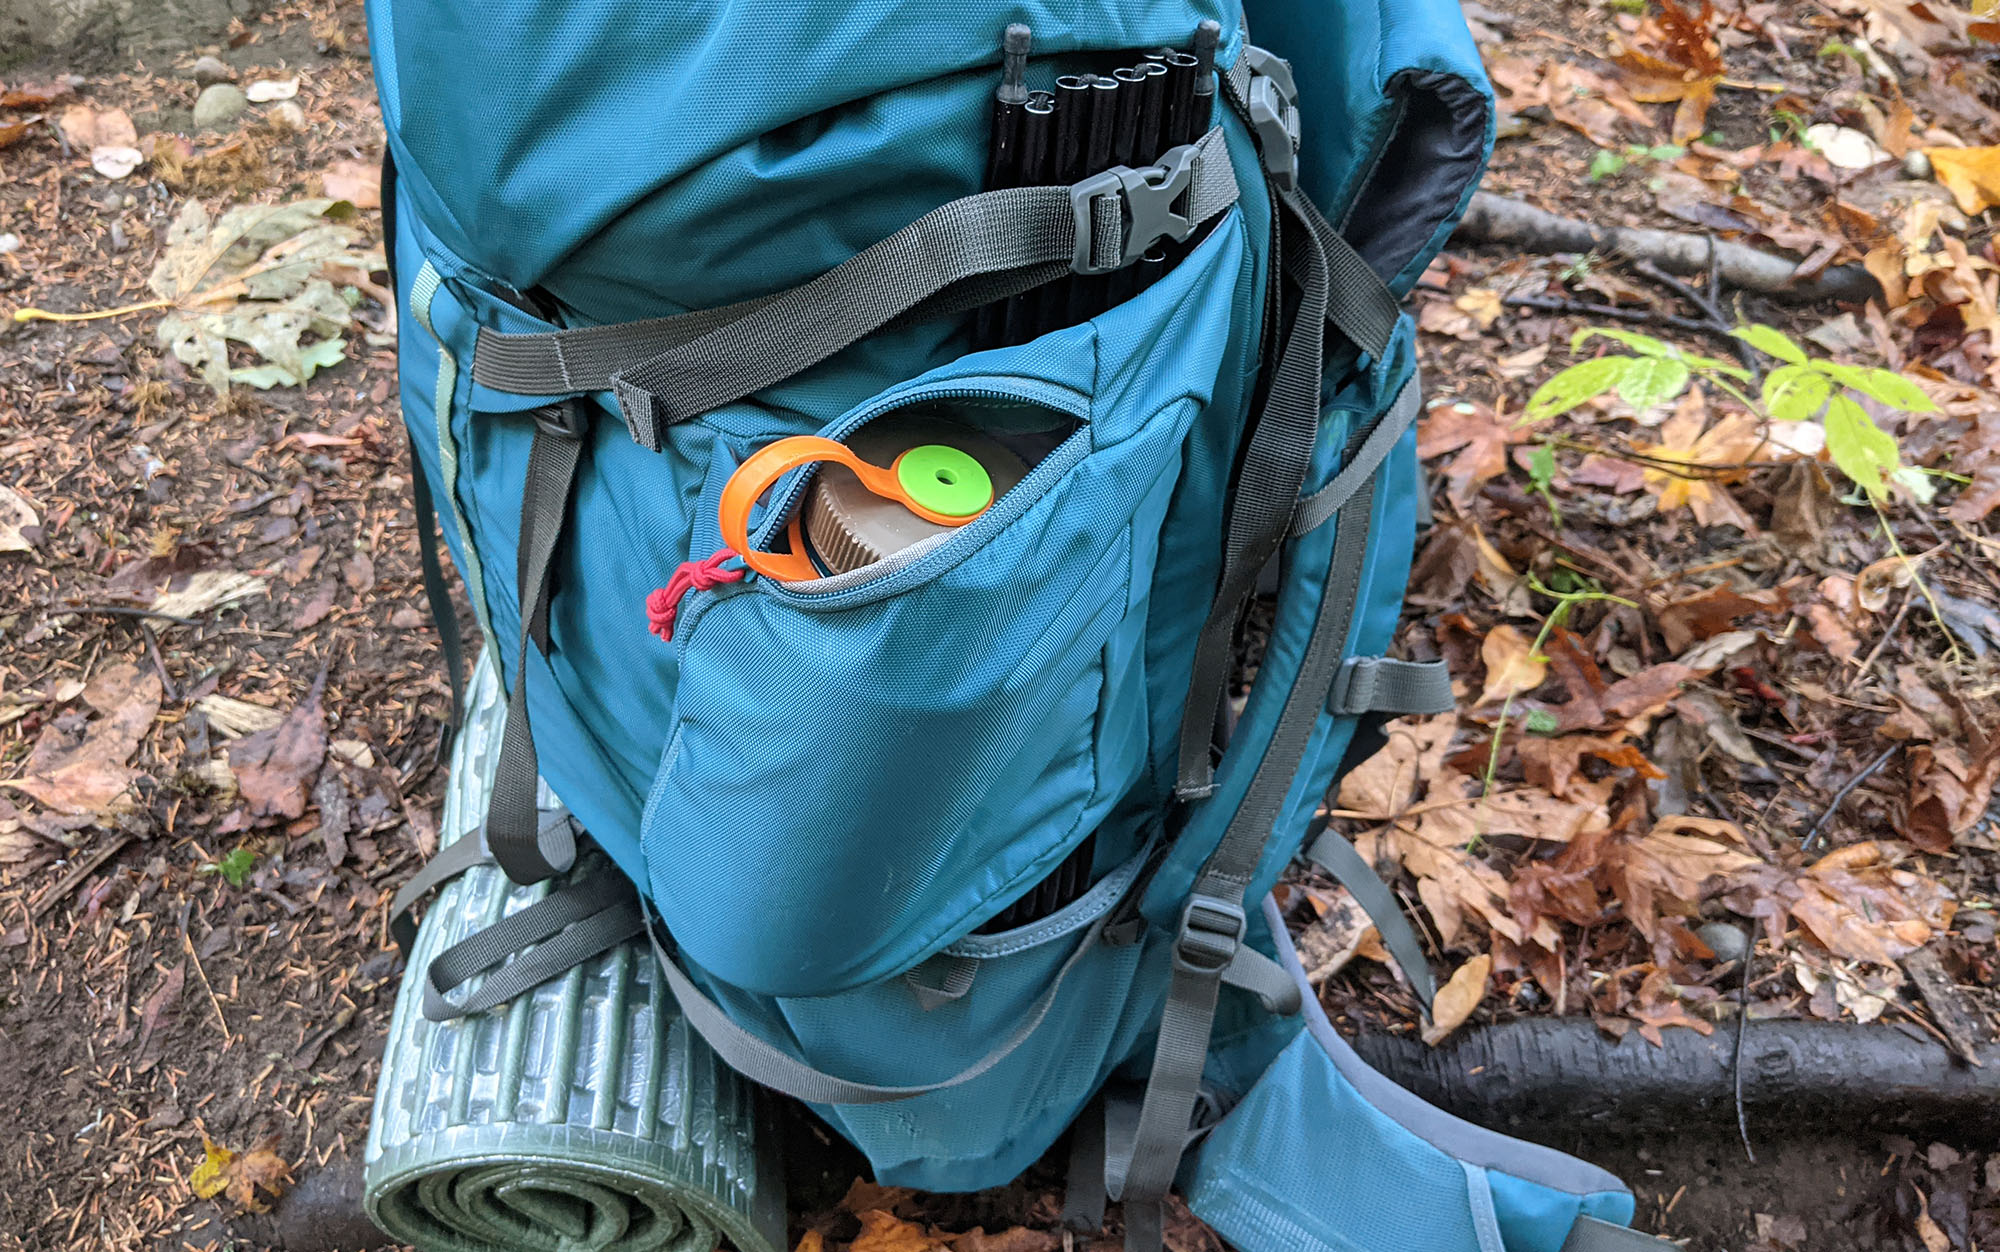 The zip pockets on each side of the Kelty Coyote was large enough to fit a Nalgene bottle (and then some), while still allowing tent poles to slide behind the pocket. A compression strap at the top provides extra security for poles as well as providing stability for unusually large loads.